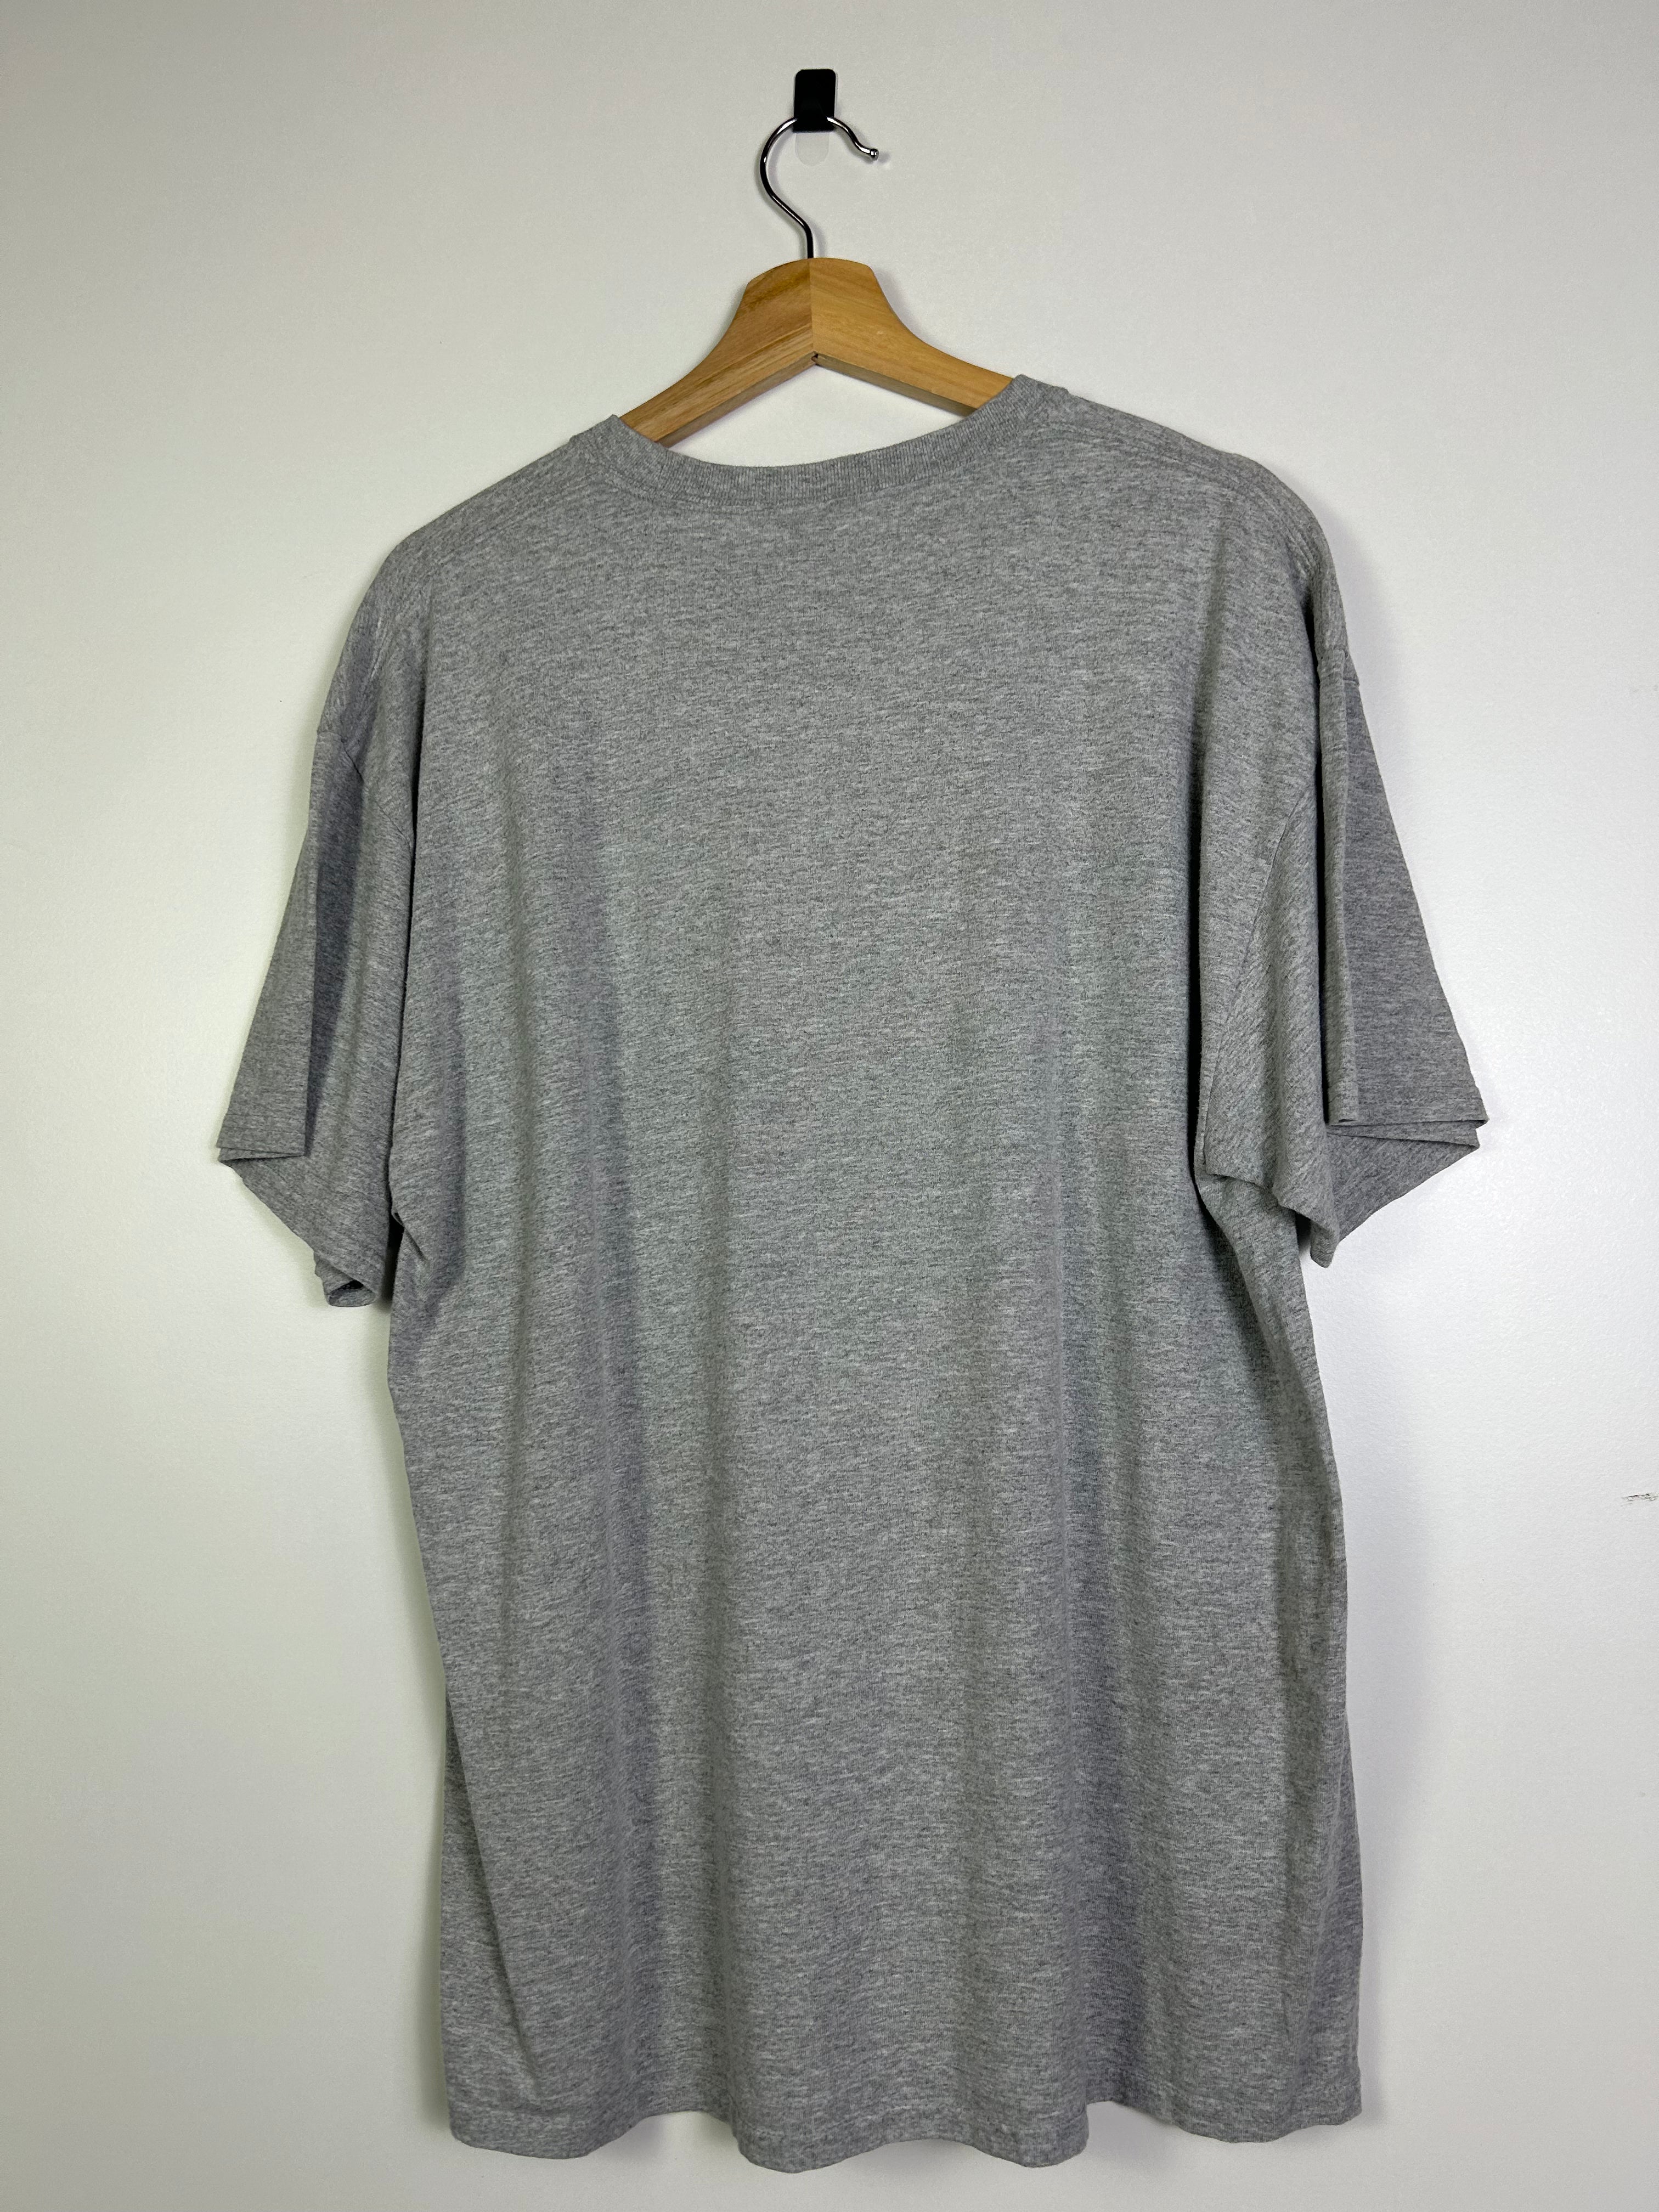 Central Emerson tee